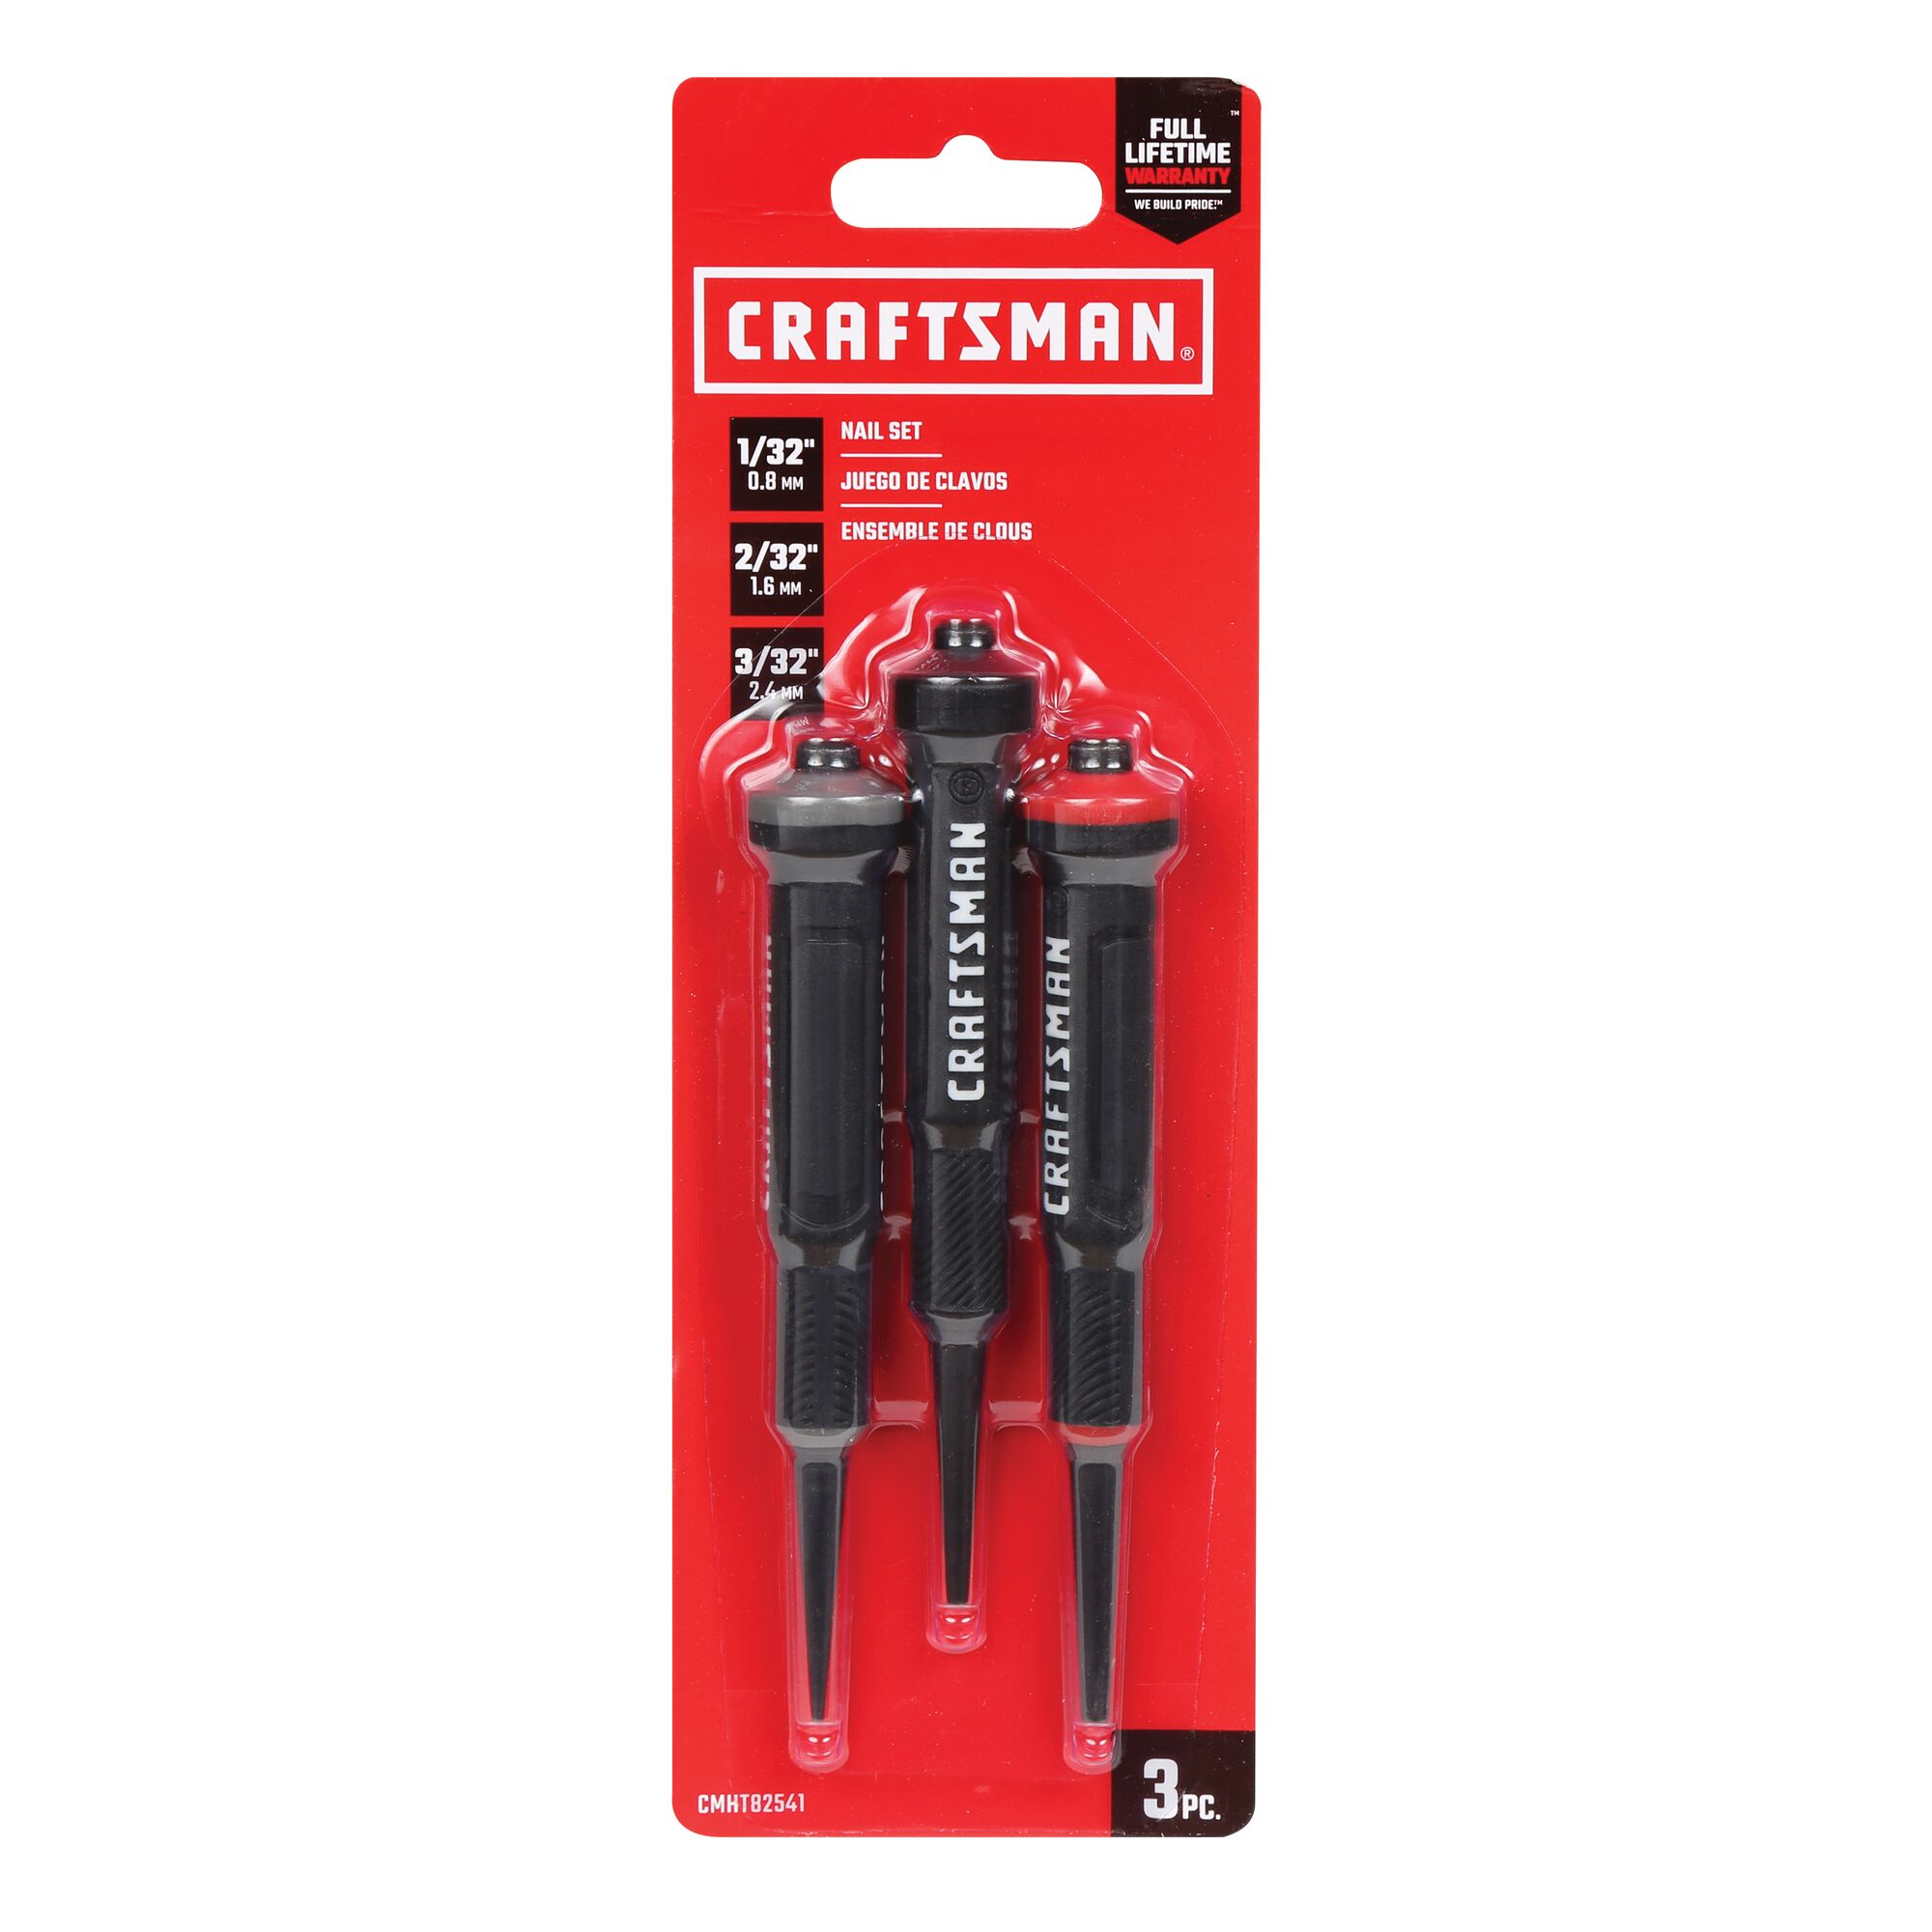 View of CRAFTSMAN Chisels & Punches packaging